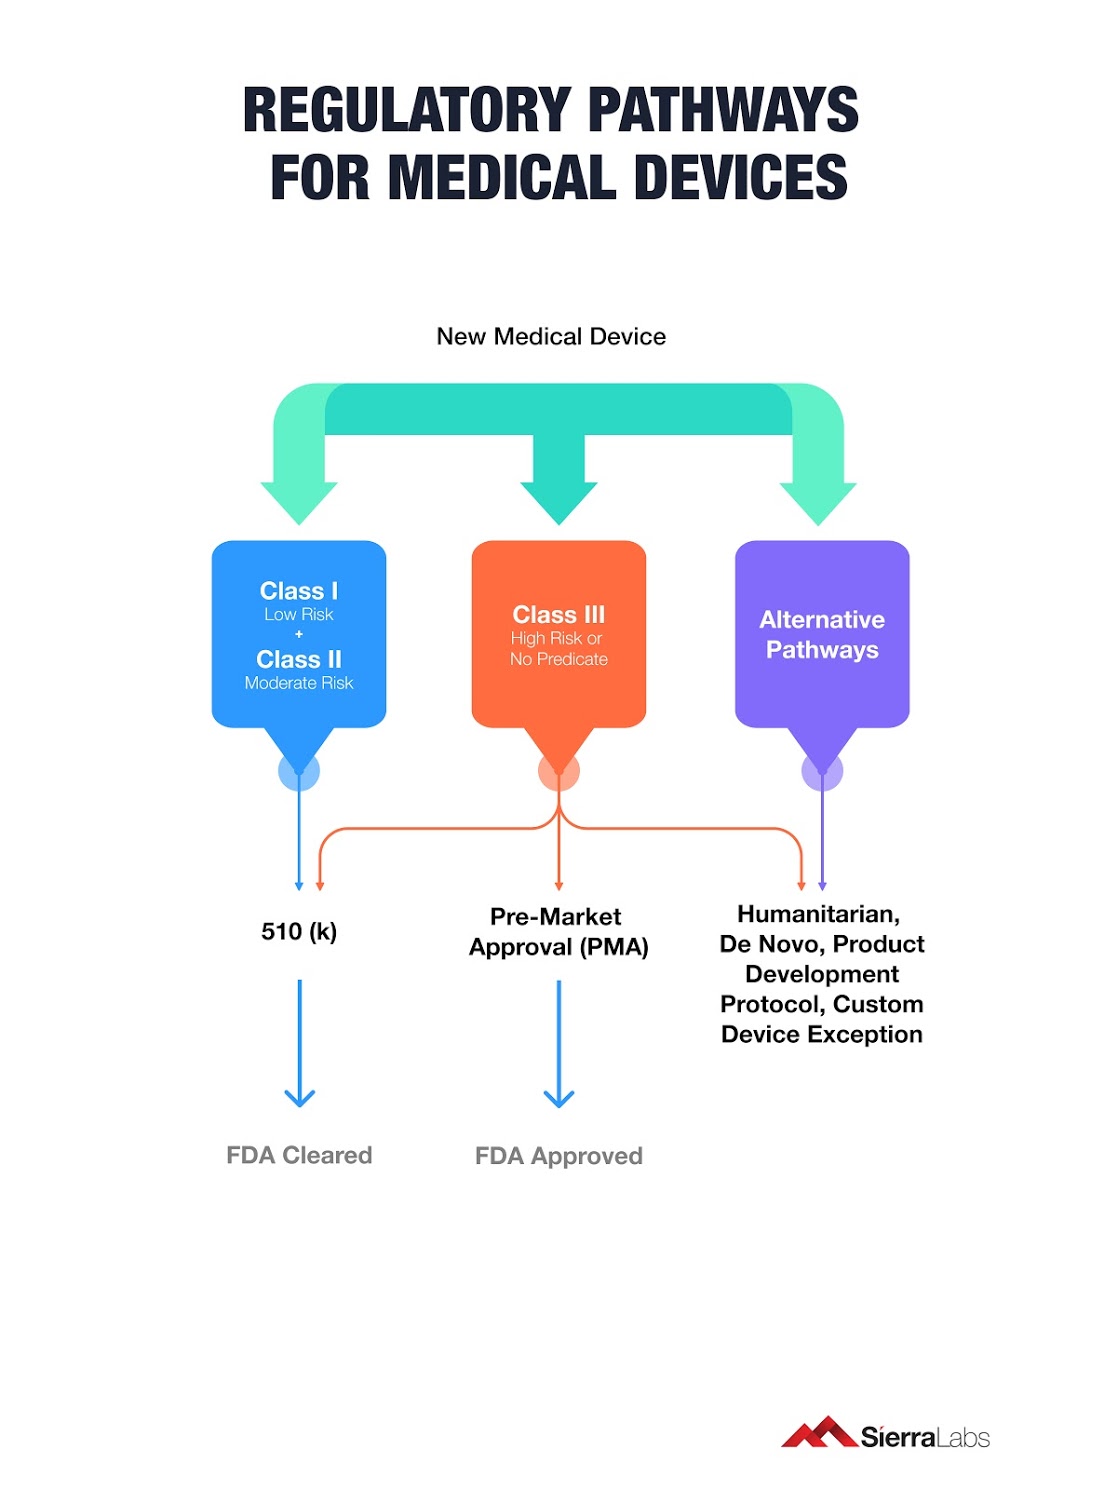 6 Regulatory Pathways to Bring Your Medical Device to Market